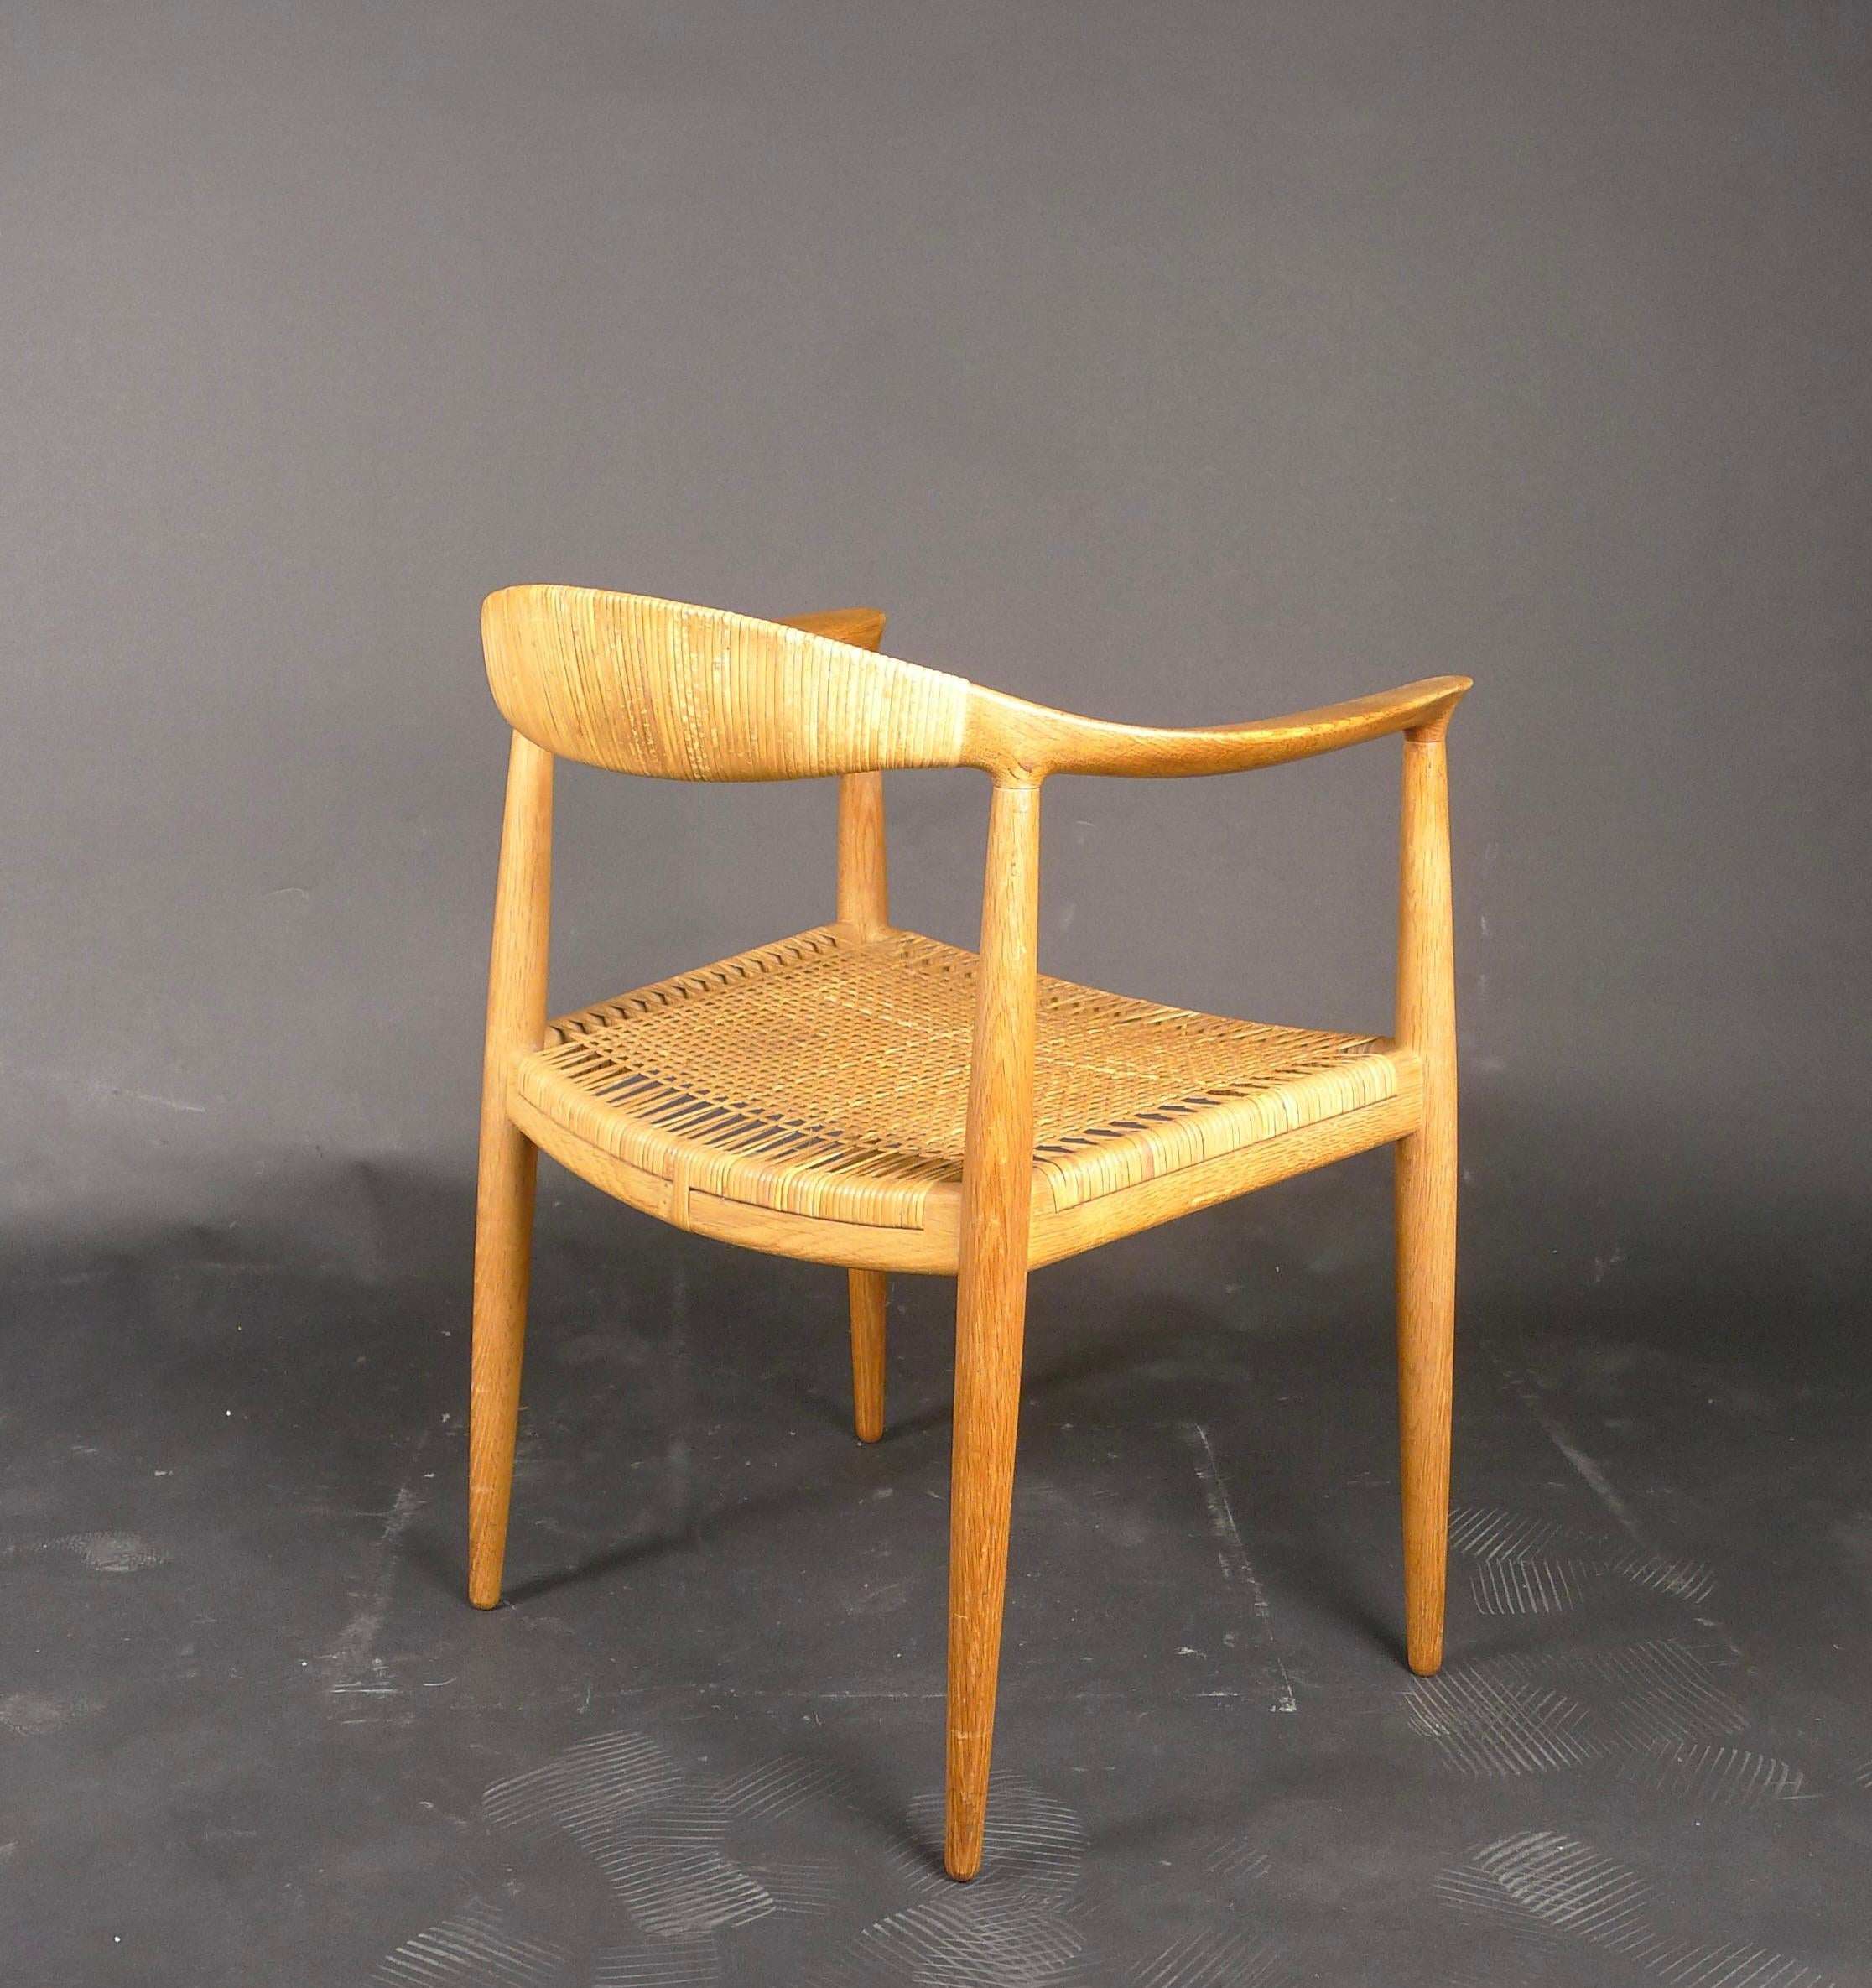 Hans Wegner, Round Chair JH501, oak and cane, made by Johannes Hansen For Sale 2